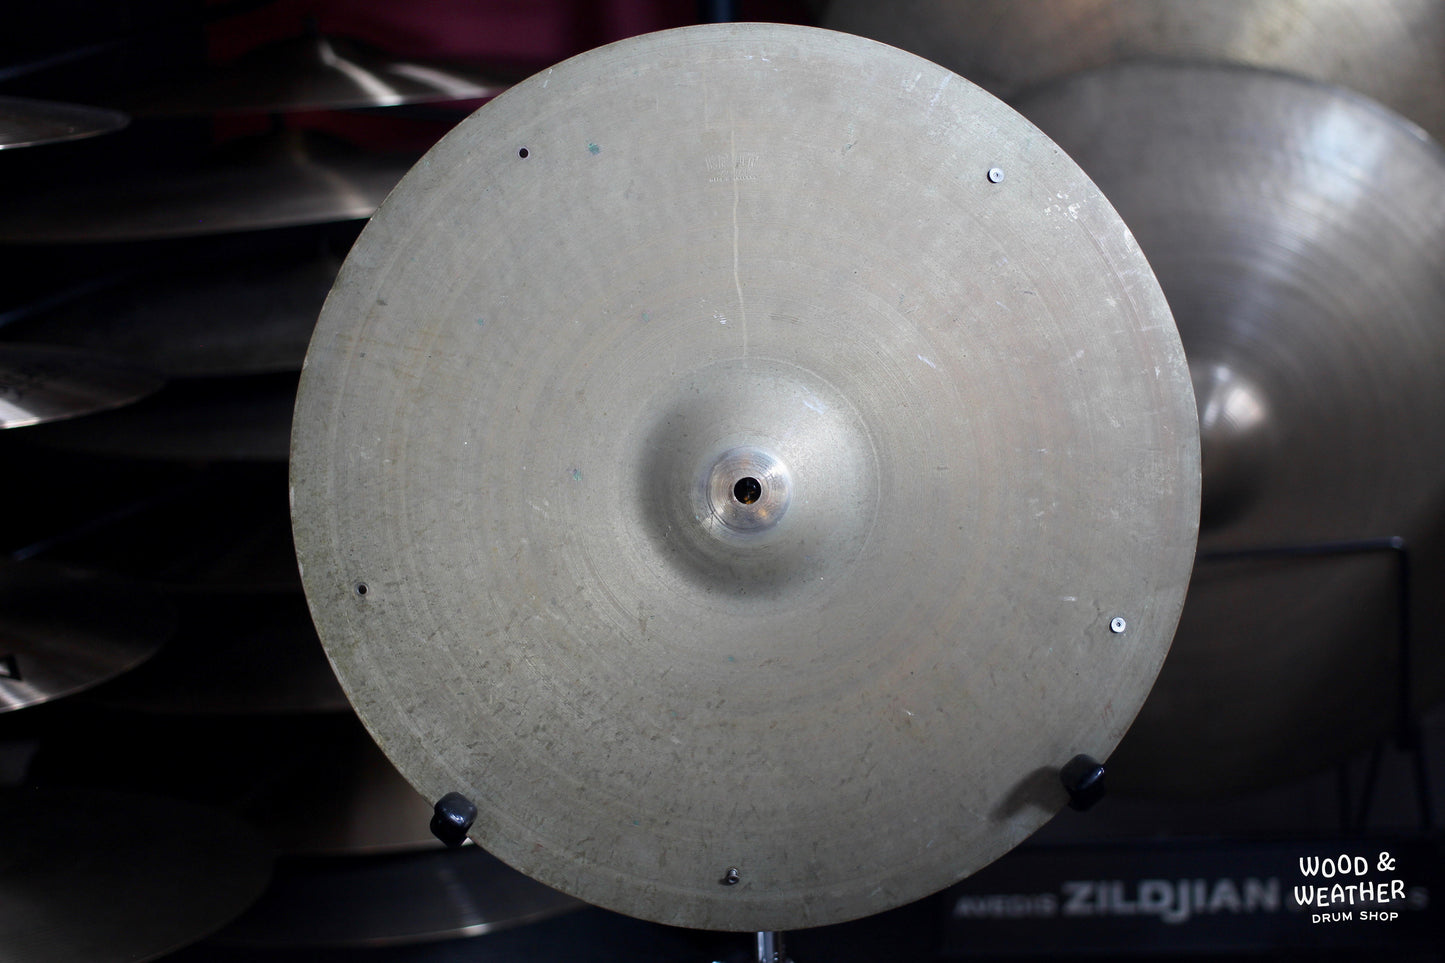 1960s Krut Special 16" Crash Cymbal with Rivets 965g